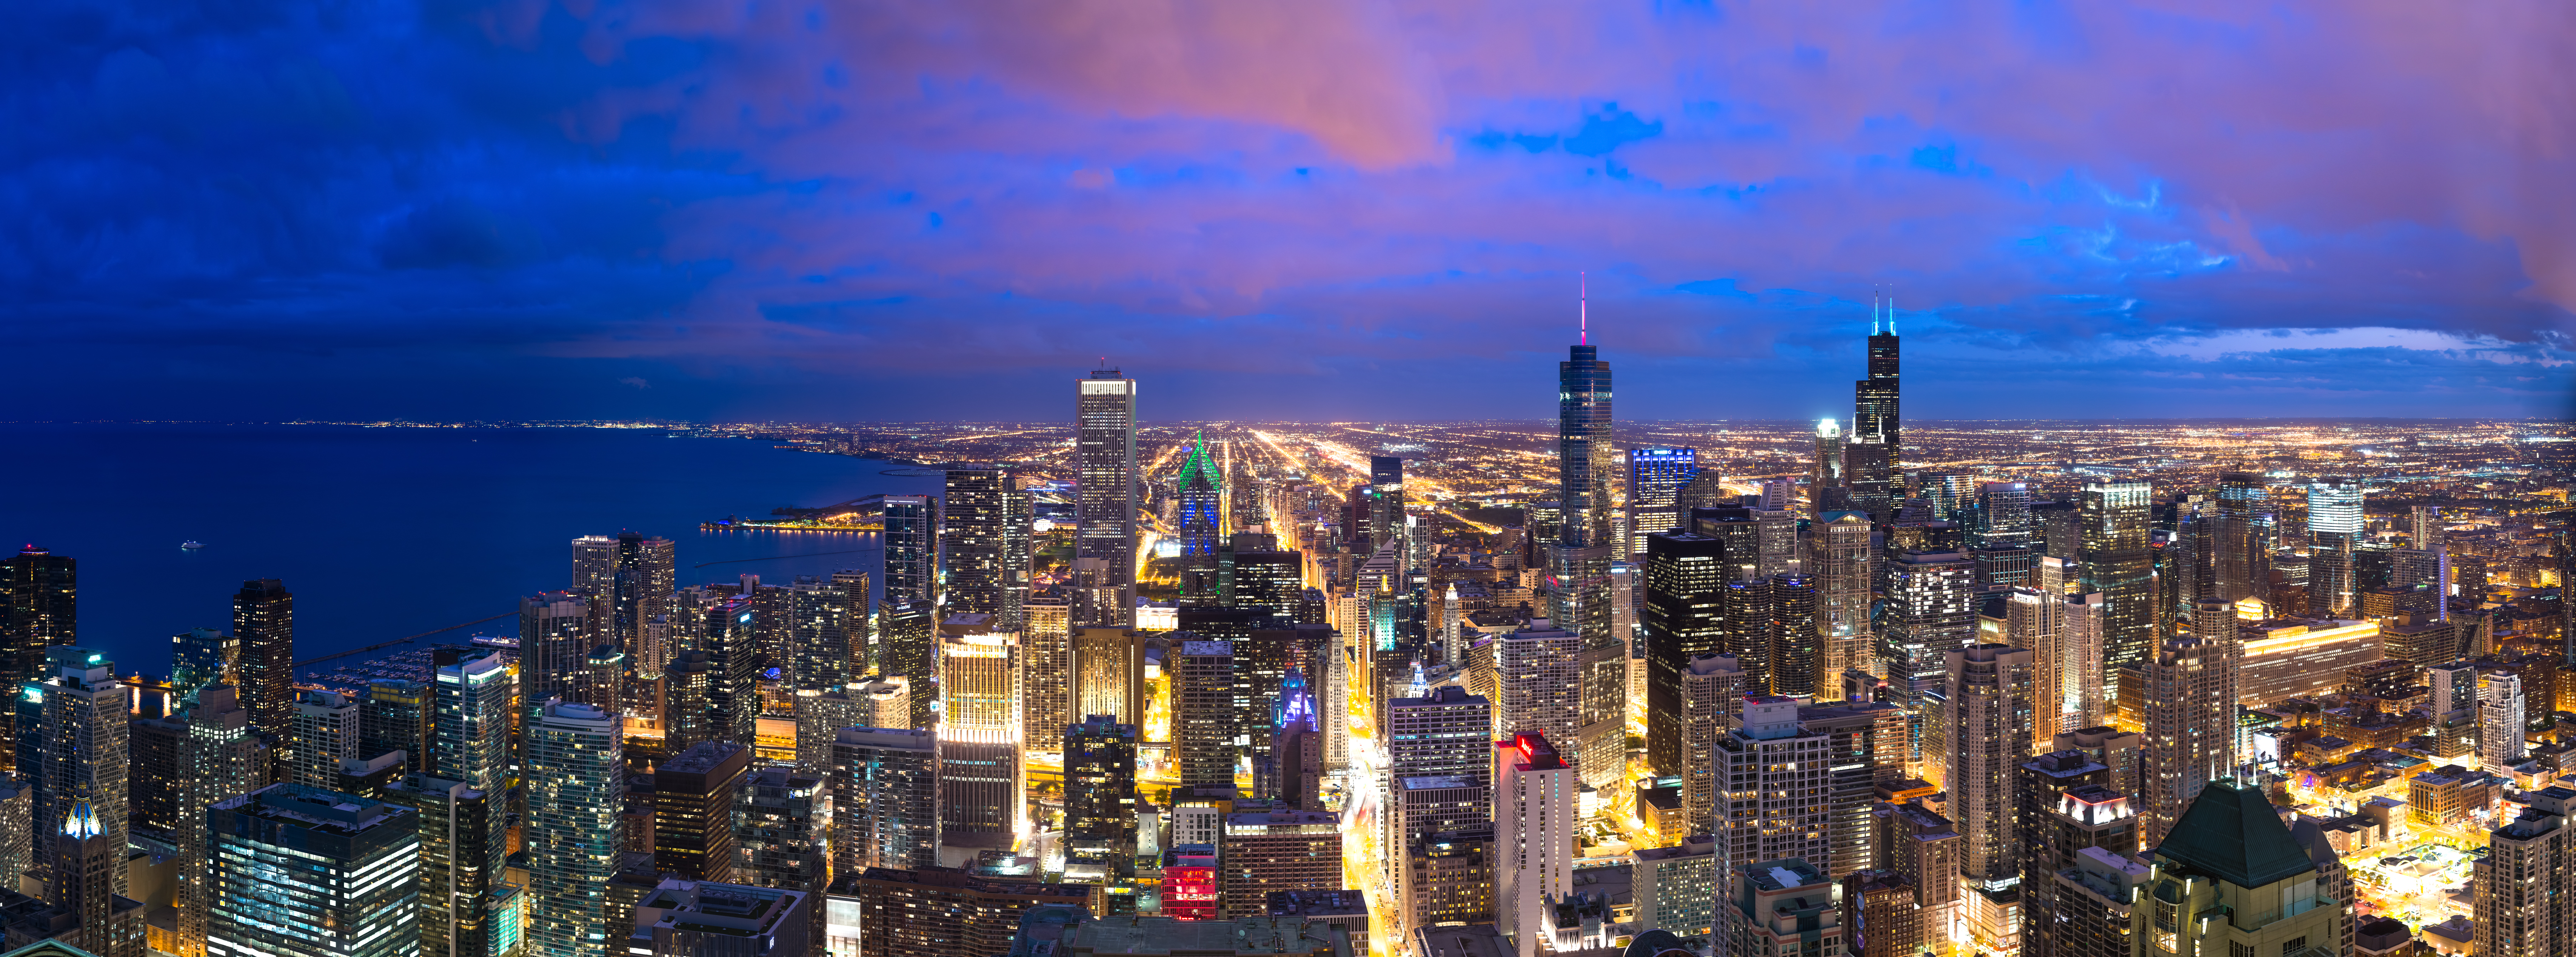 360 CHICAGO | The Magnificent Mile